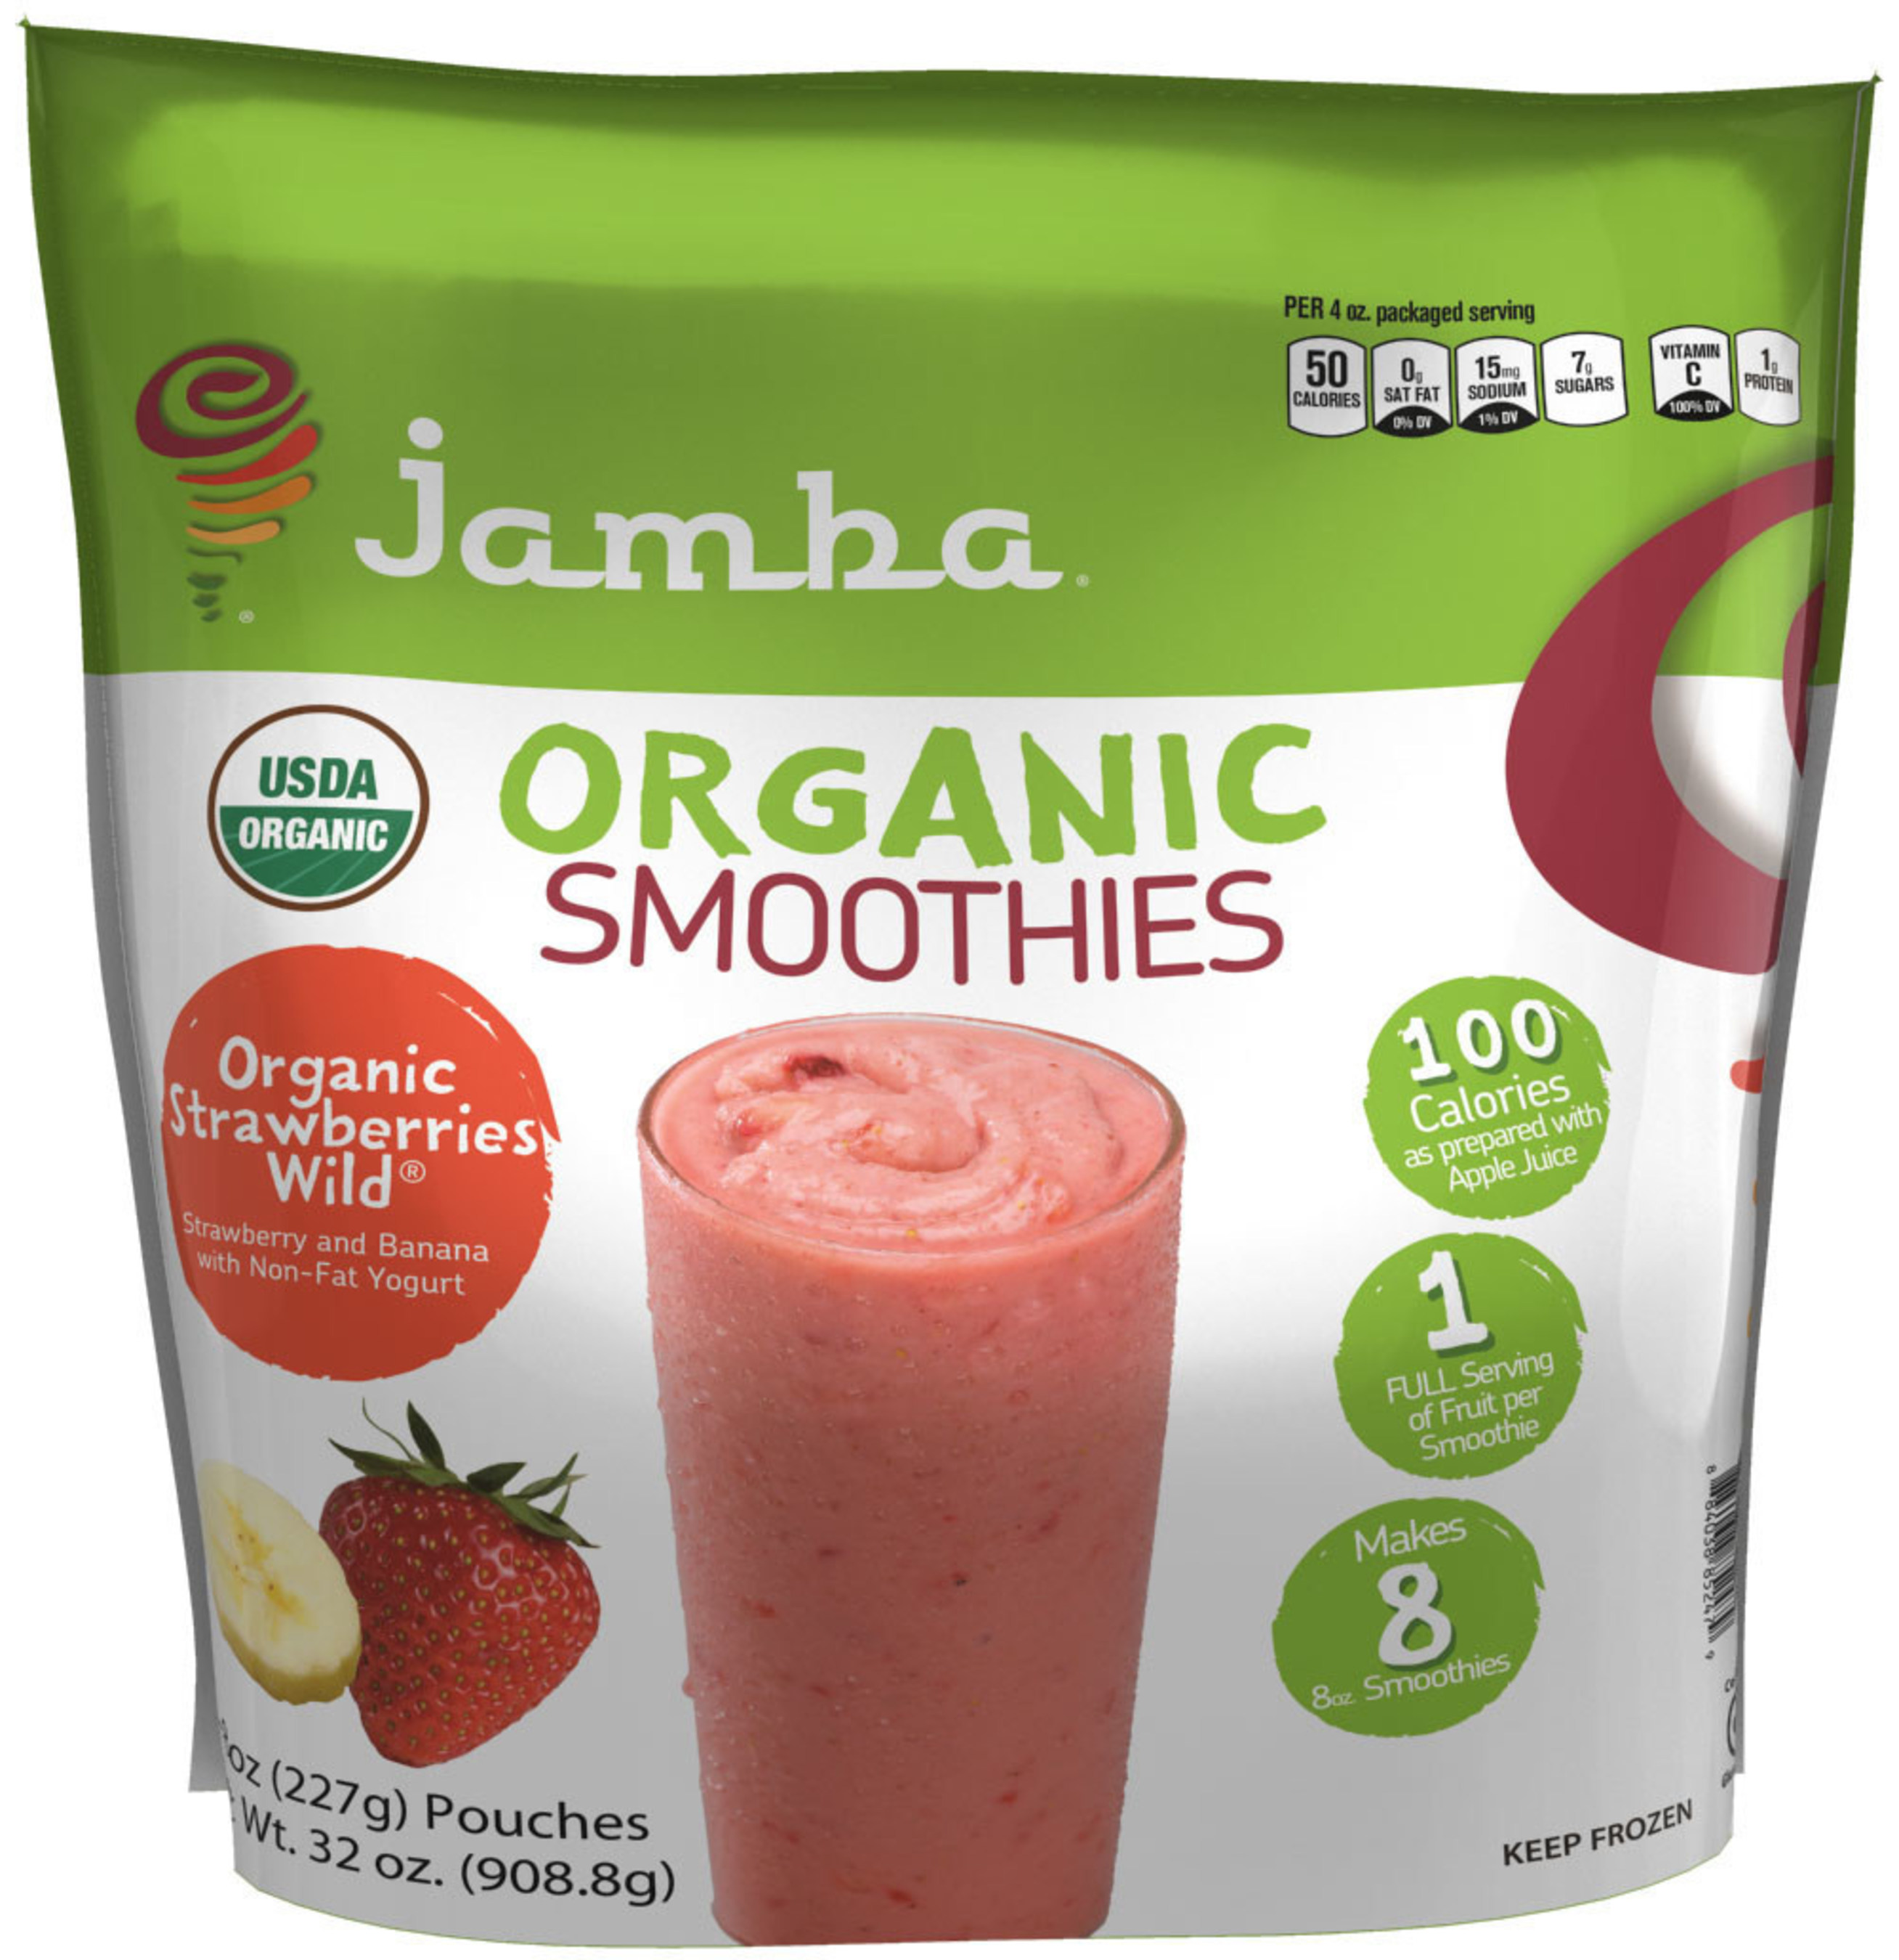 Jamba At-Home smoothie line welcomes new certified-organic variety in bulk-sized package available at Sam's Club